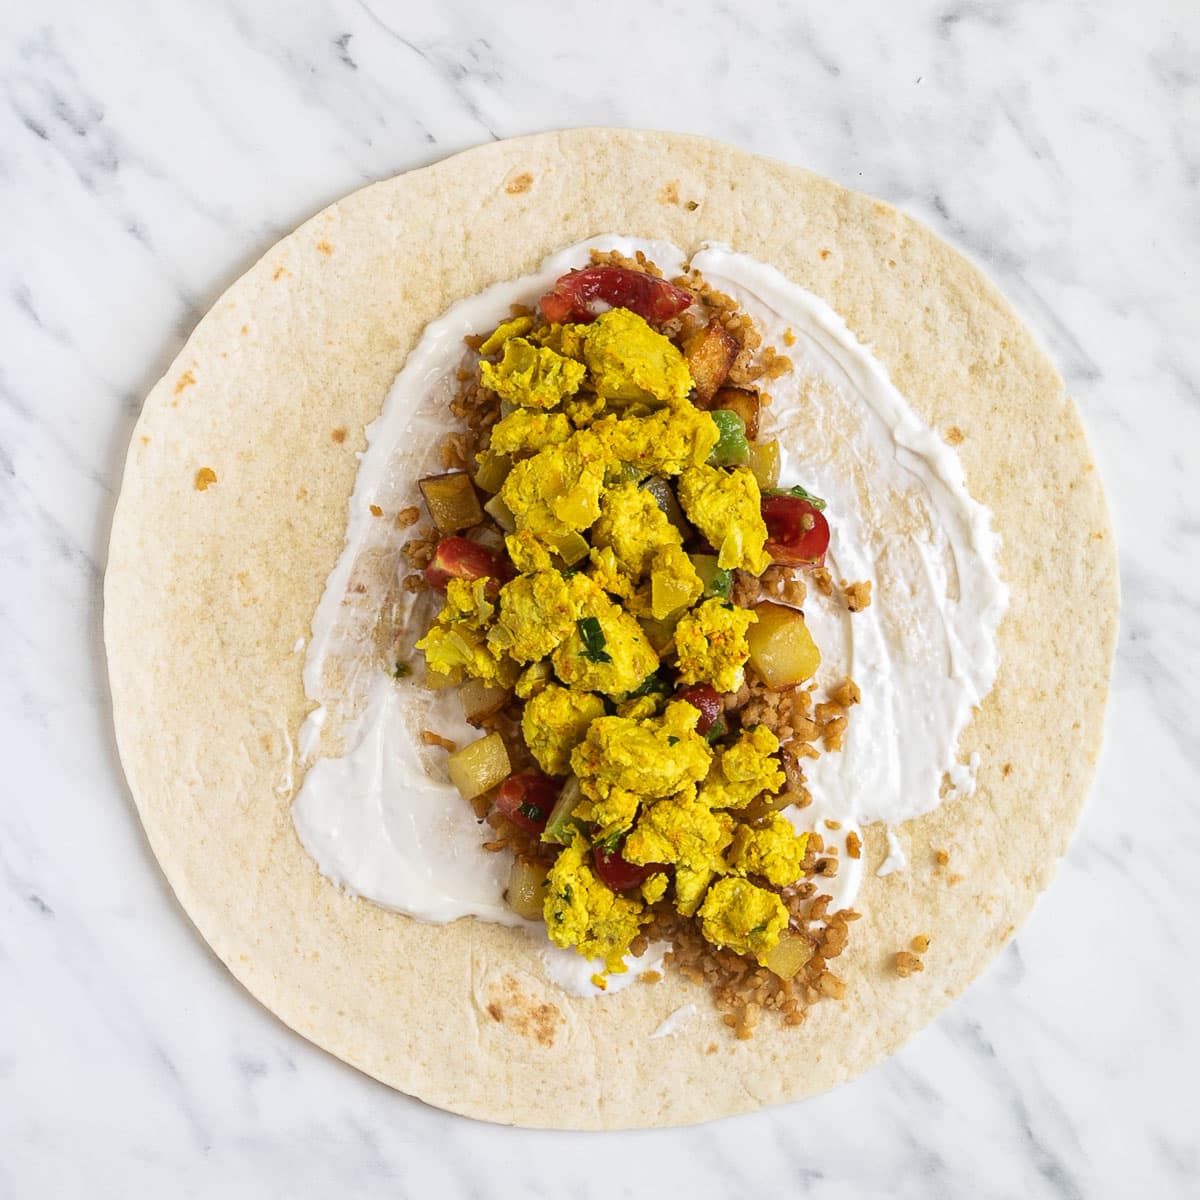 A tortilla on a marble surface covered partly with white sour cream and topped with sausage crumbles, diced potatoes, tofu scrambles, and avocado tomato salsa.